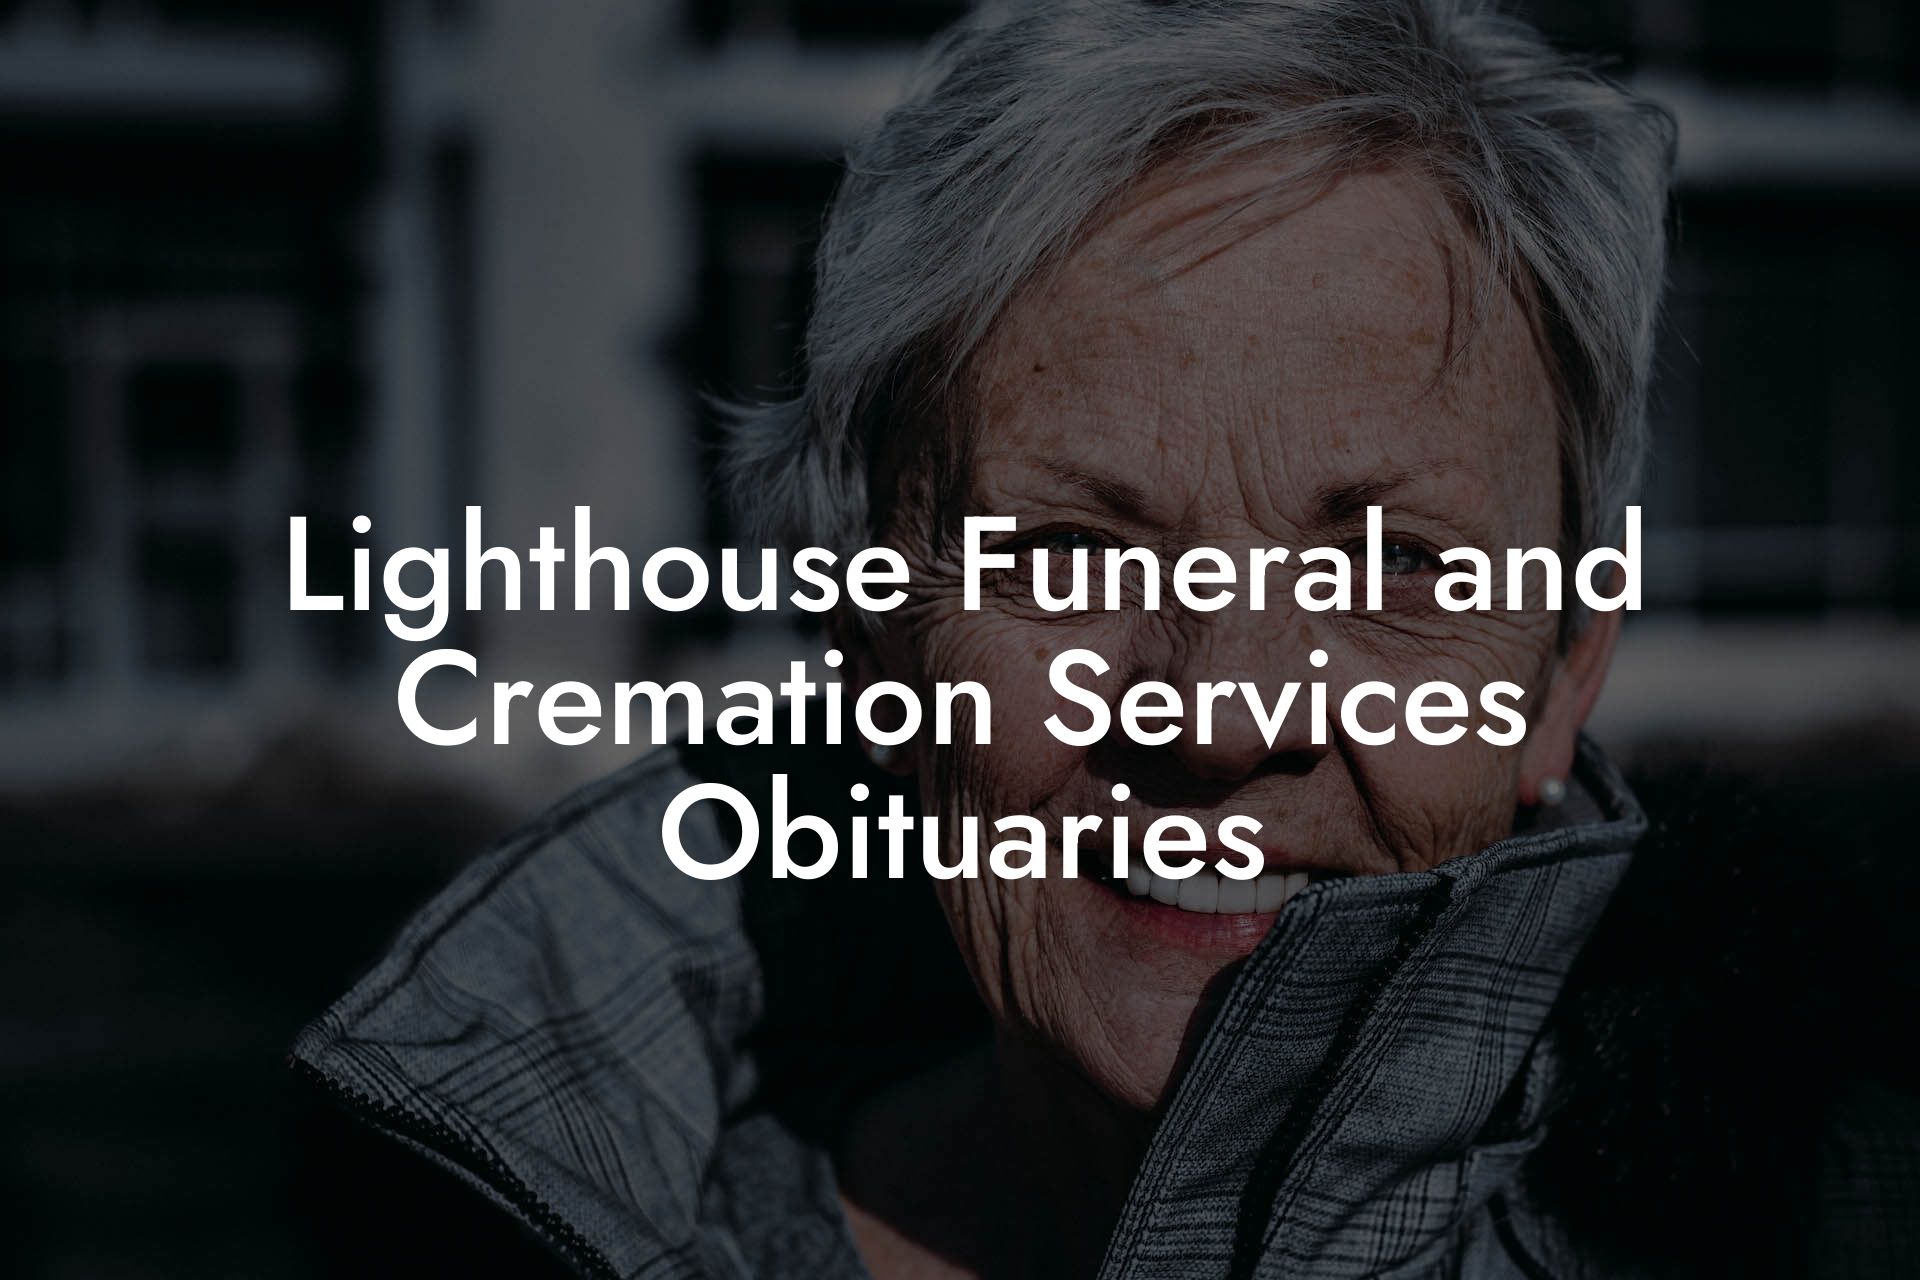 Lighthouse Funeral and Cremation Services Obituaries